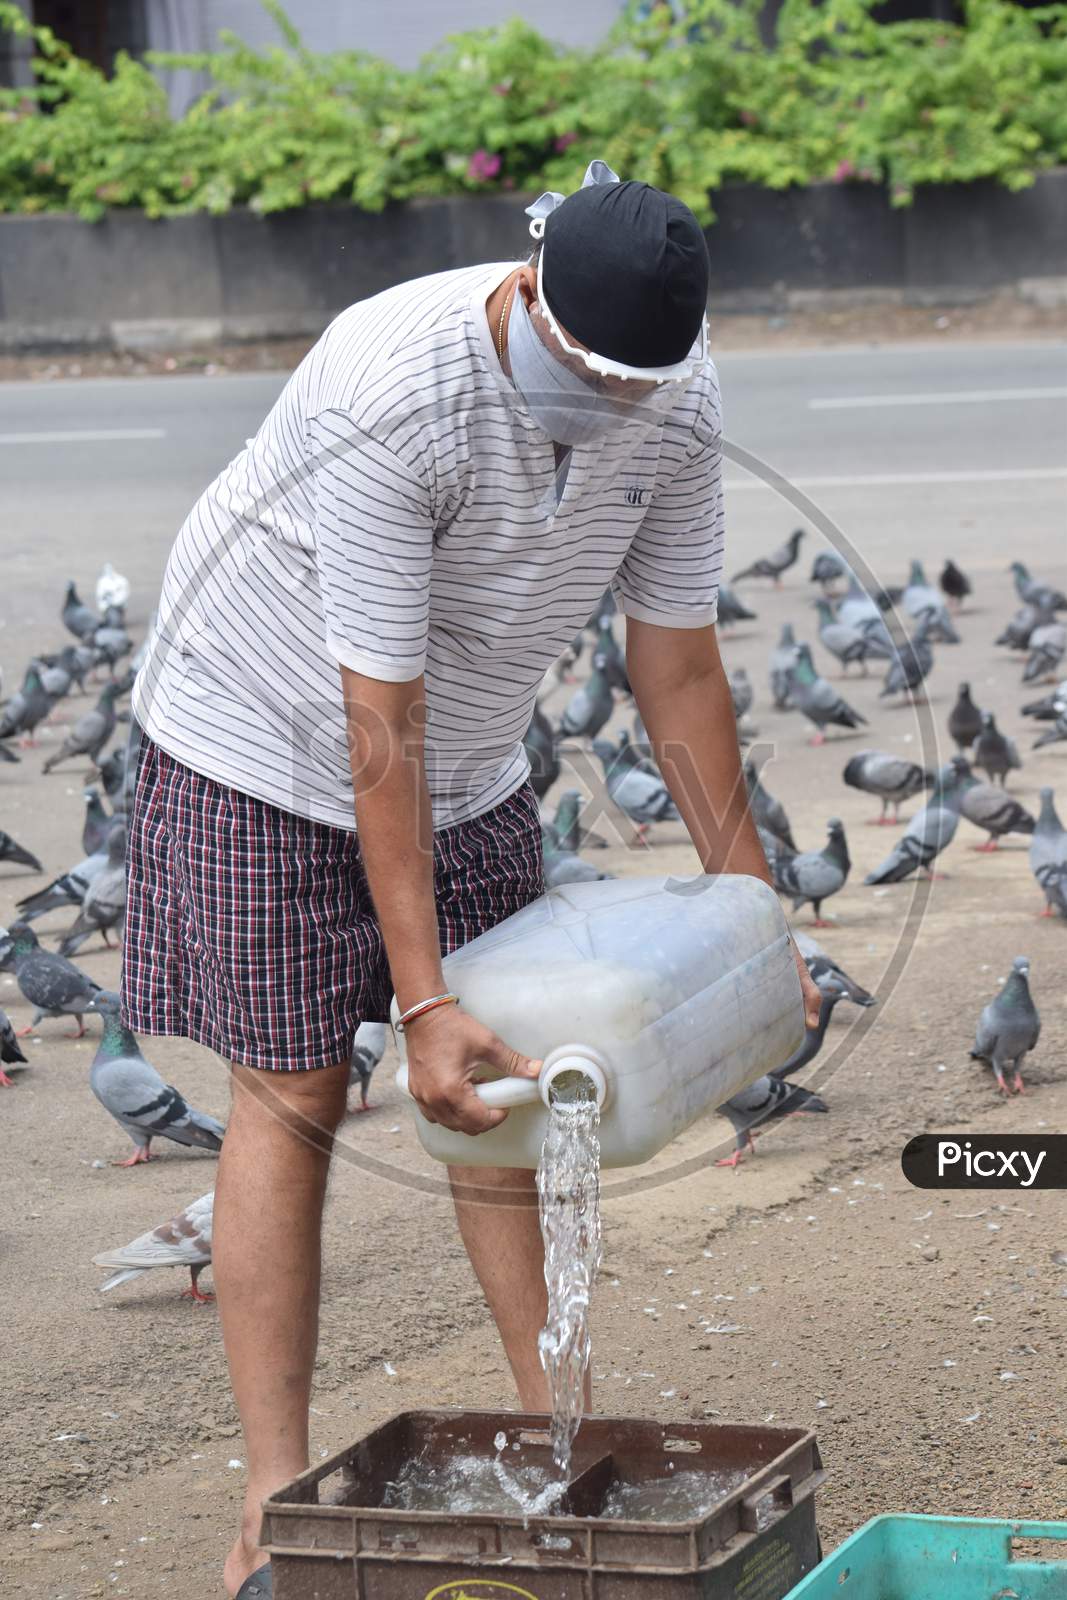 Hyderabad, Telangana, India. july-13-2020: A man is feeding pigeons all around in corona virus pandemic time, peoples caring on birds, wearing mask, drinking water for pigeons